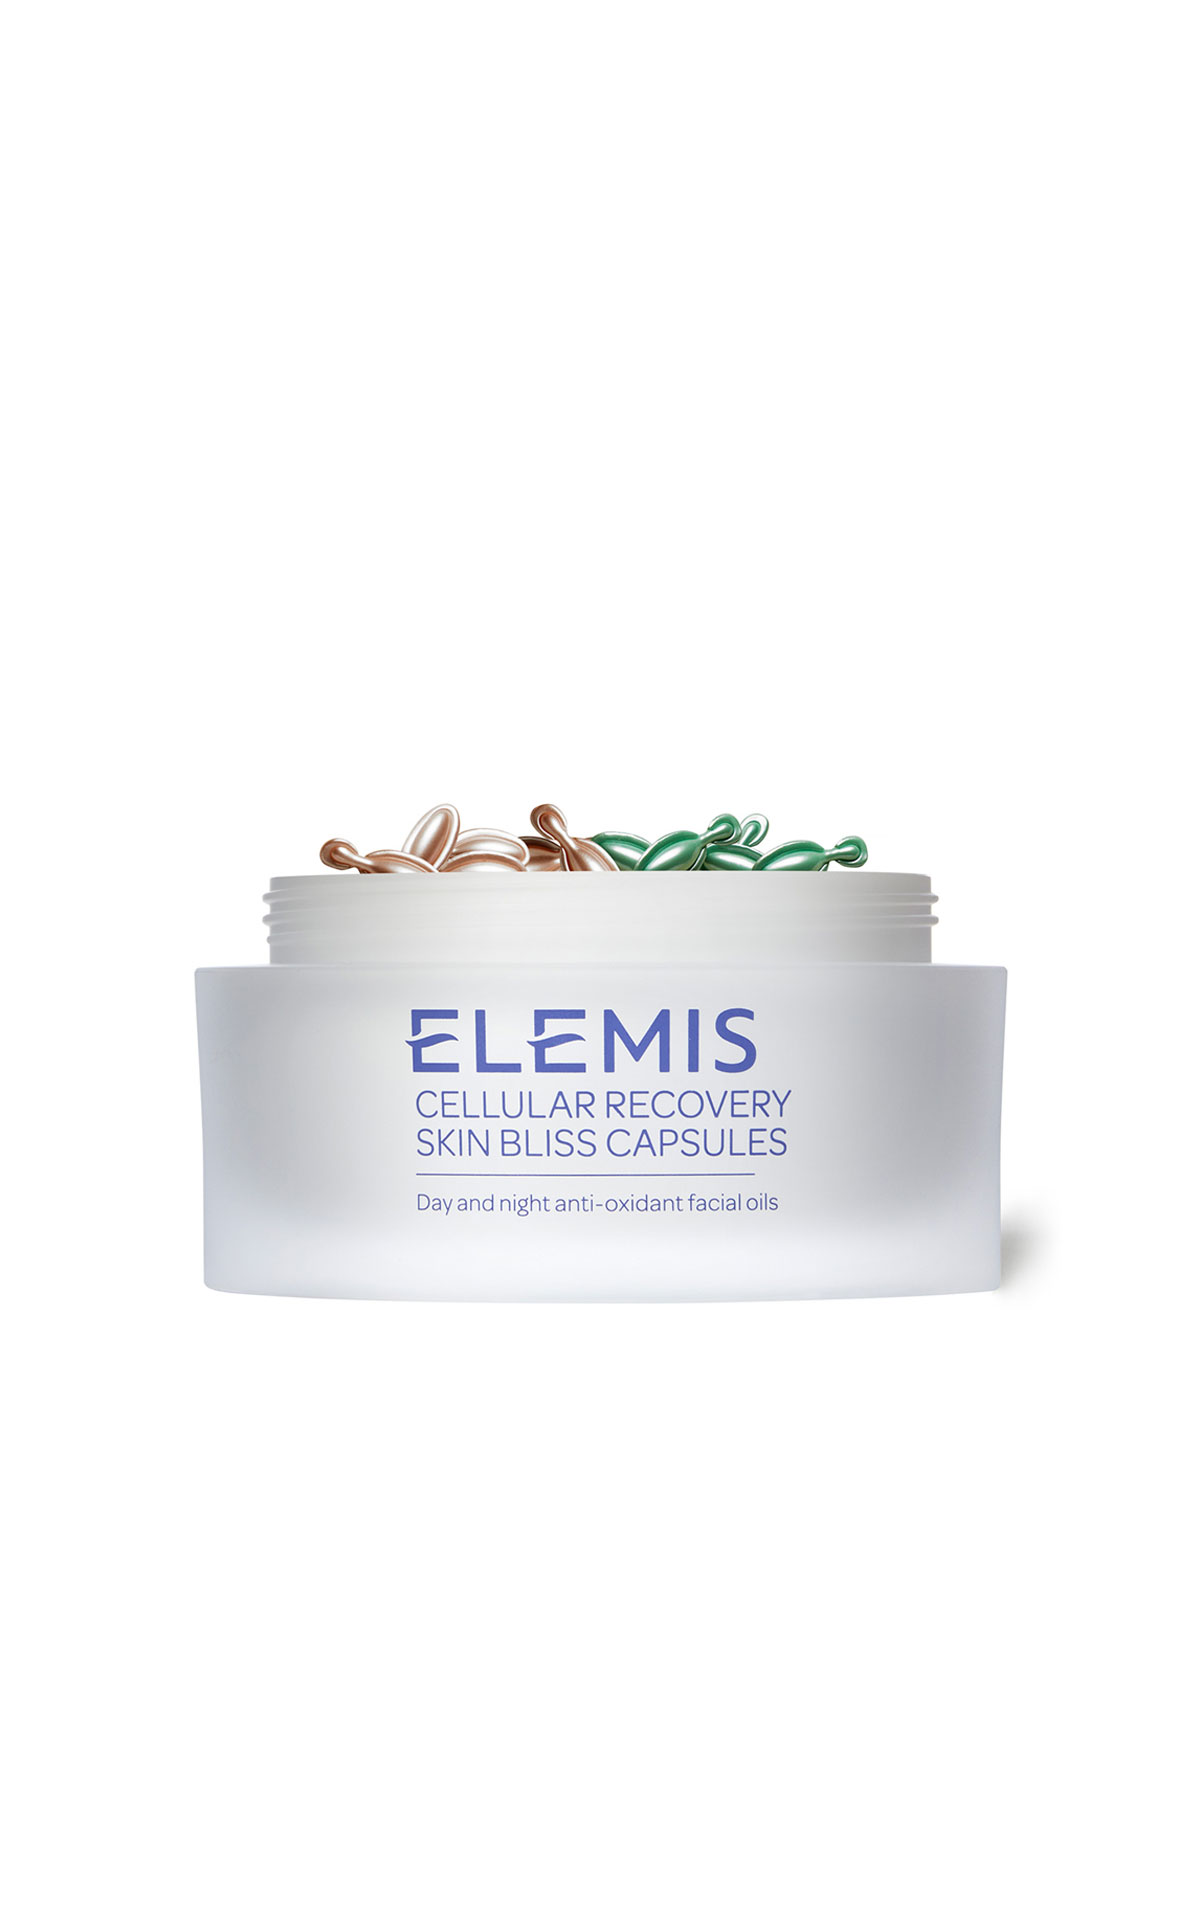 ELEMIS Cellular recovery skin bliss capsules (60) from Bicester Village